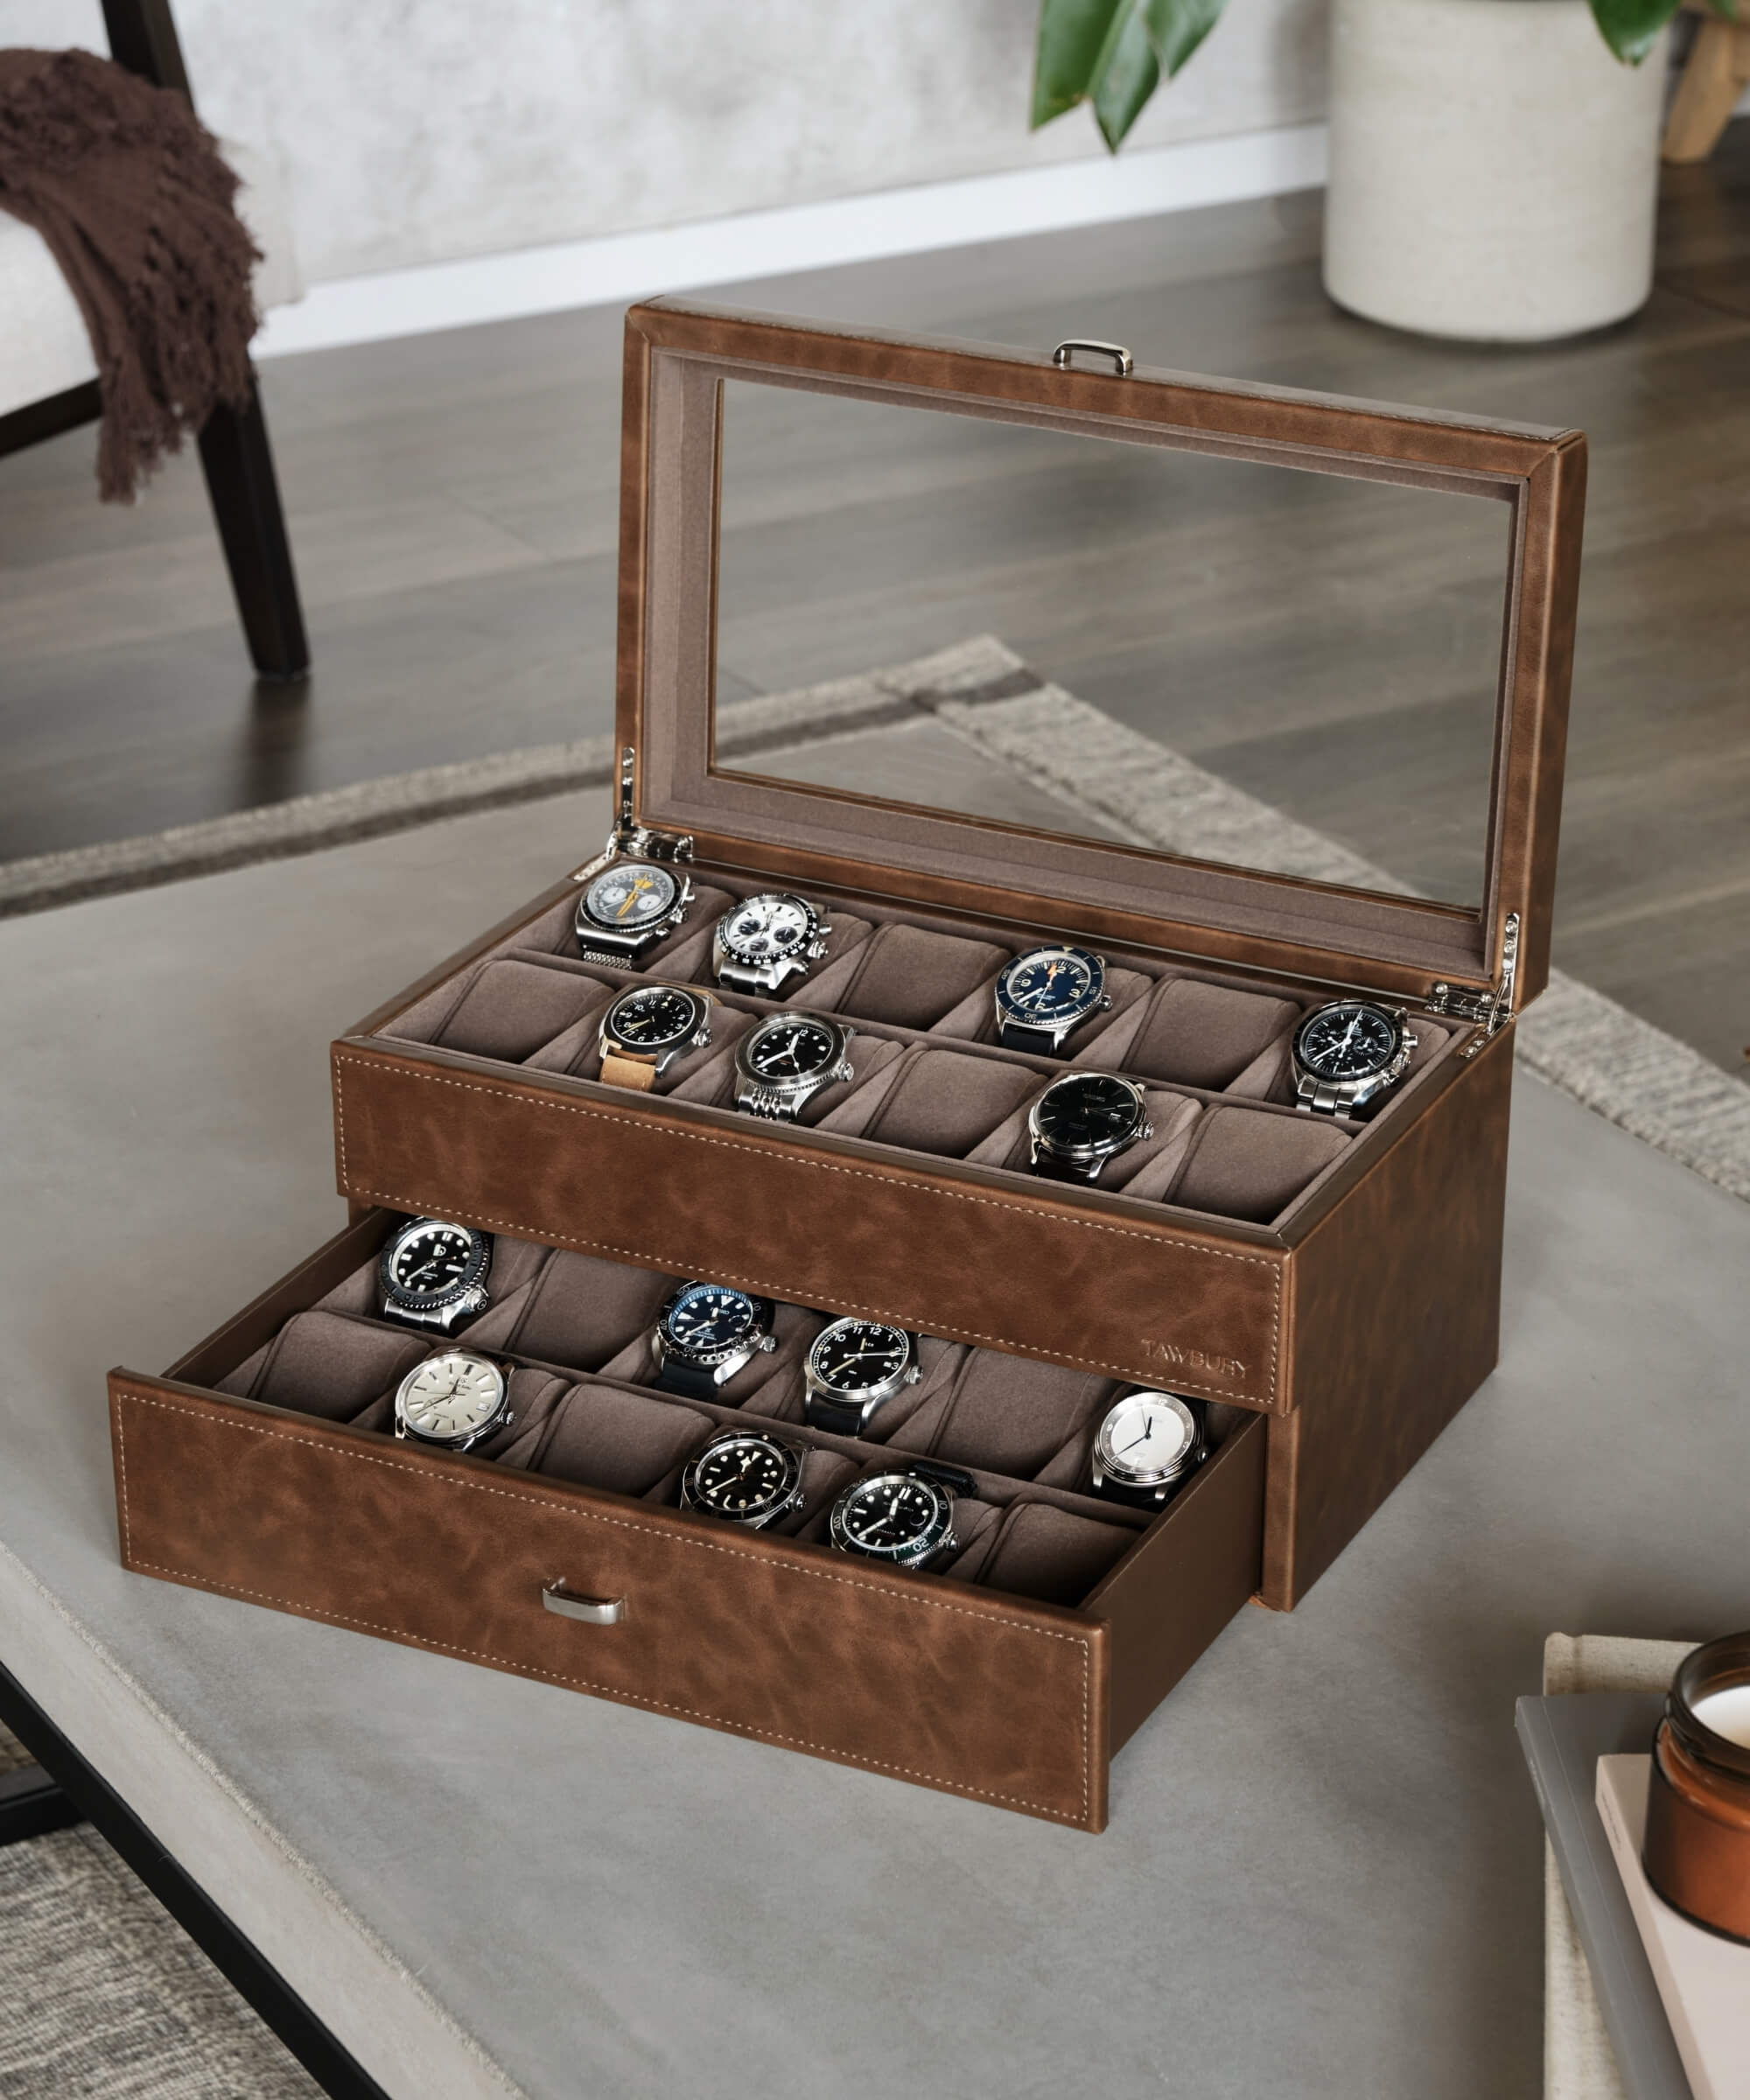 The TAWBURY Bayswater 24 Slot Watch Box with Drawer - Brown is a sleek brown leather box designed to protect and organise an extensive collection of watches. This premium box is perfect for watch enthusiasts looking to display their time.